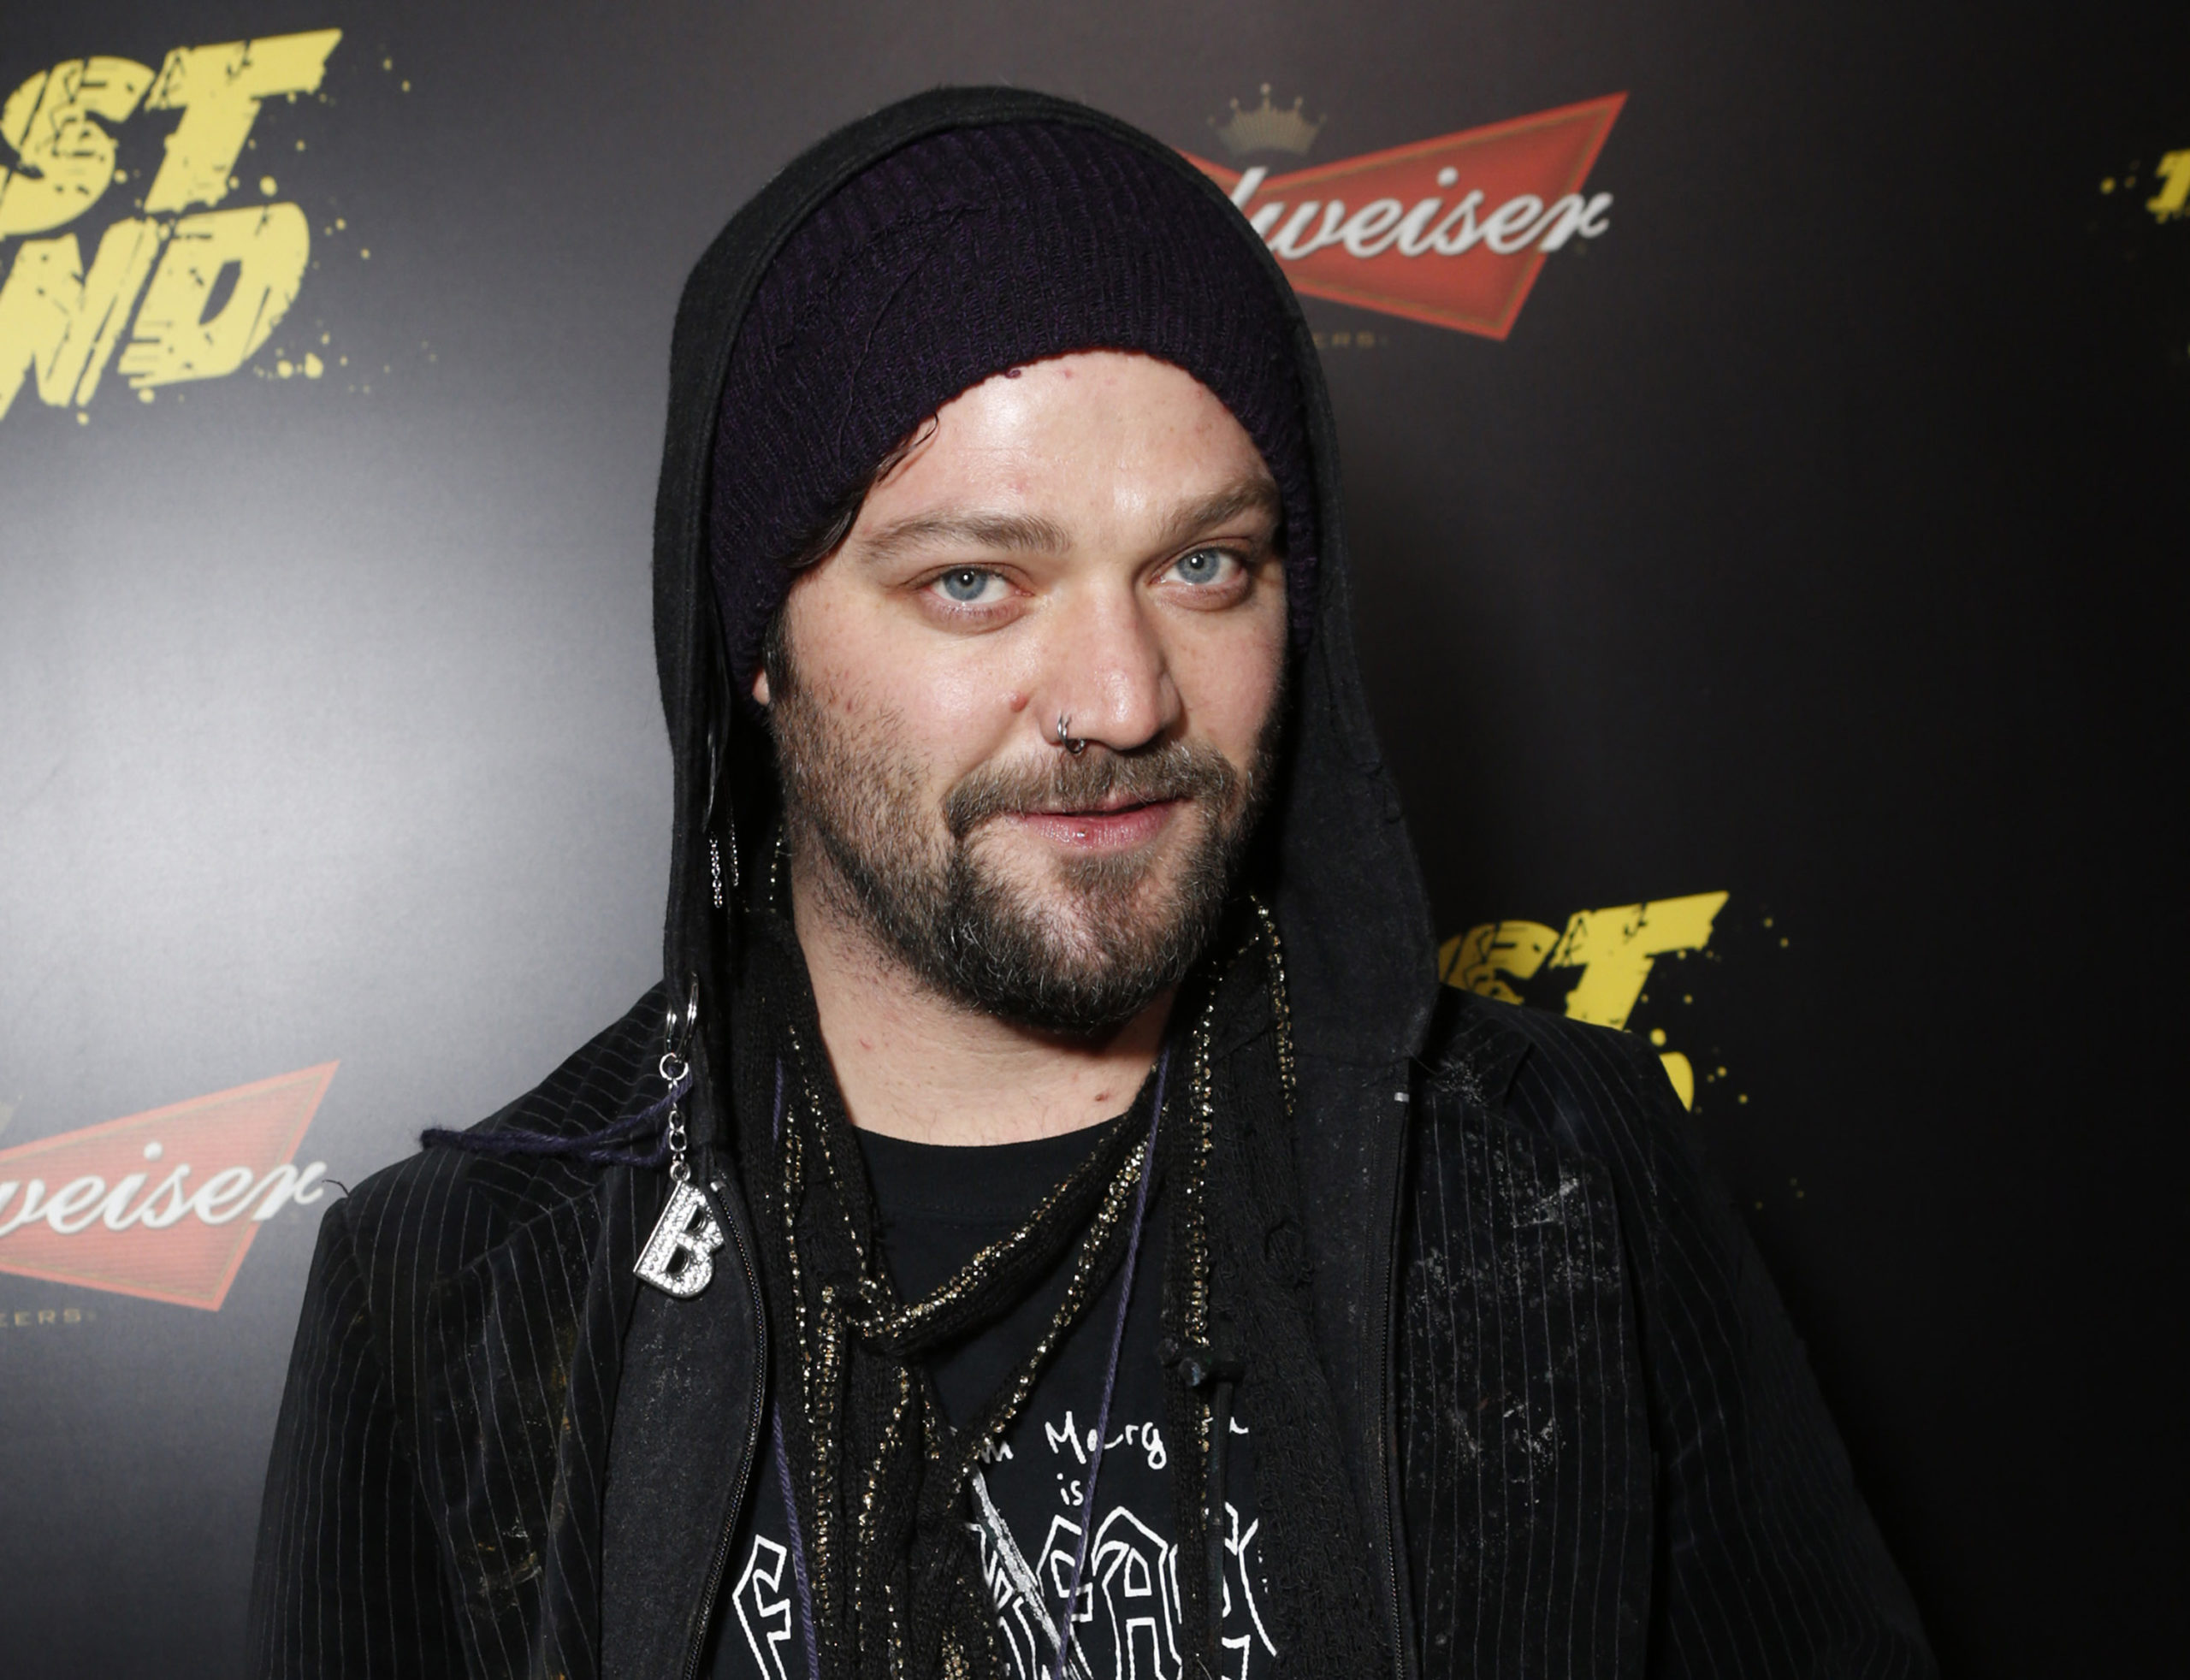 Bam Margera Reportedly Taken to Rehab Facility by Police